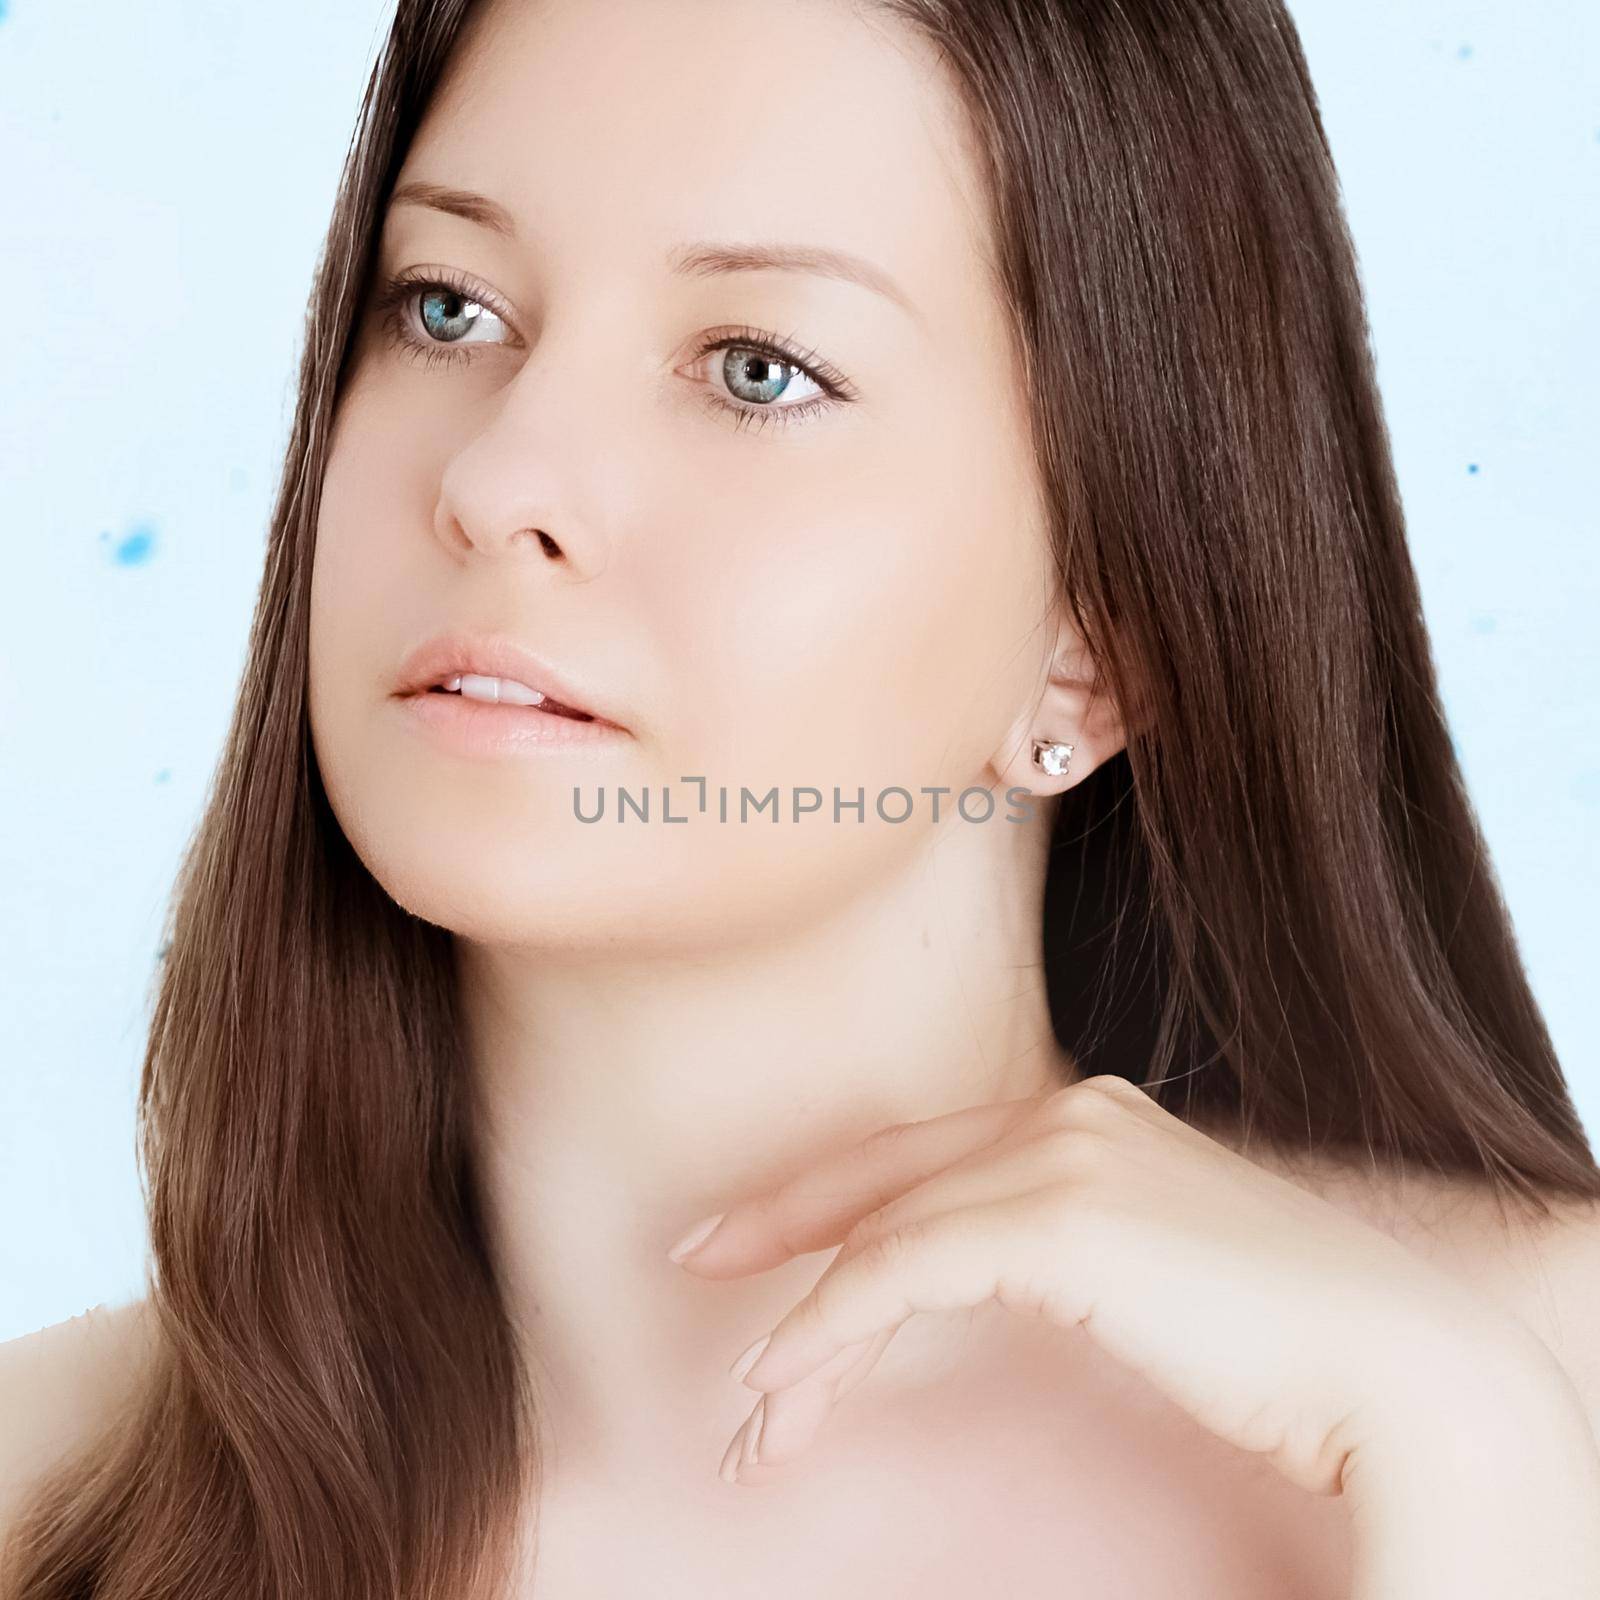 Rejuvenation skincare and beauty ad, beauty face portrait of young woman with healthy clean skin, blue cosmetic liquid drops on background.